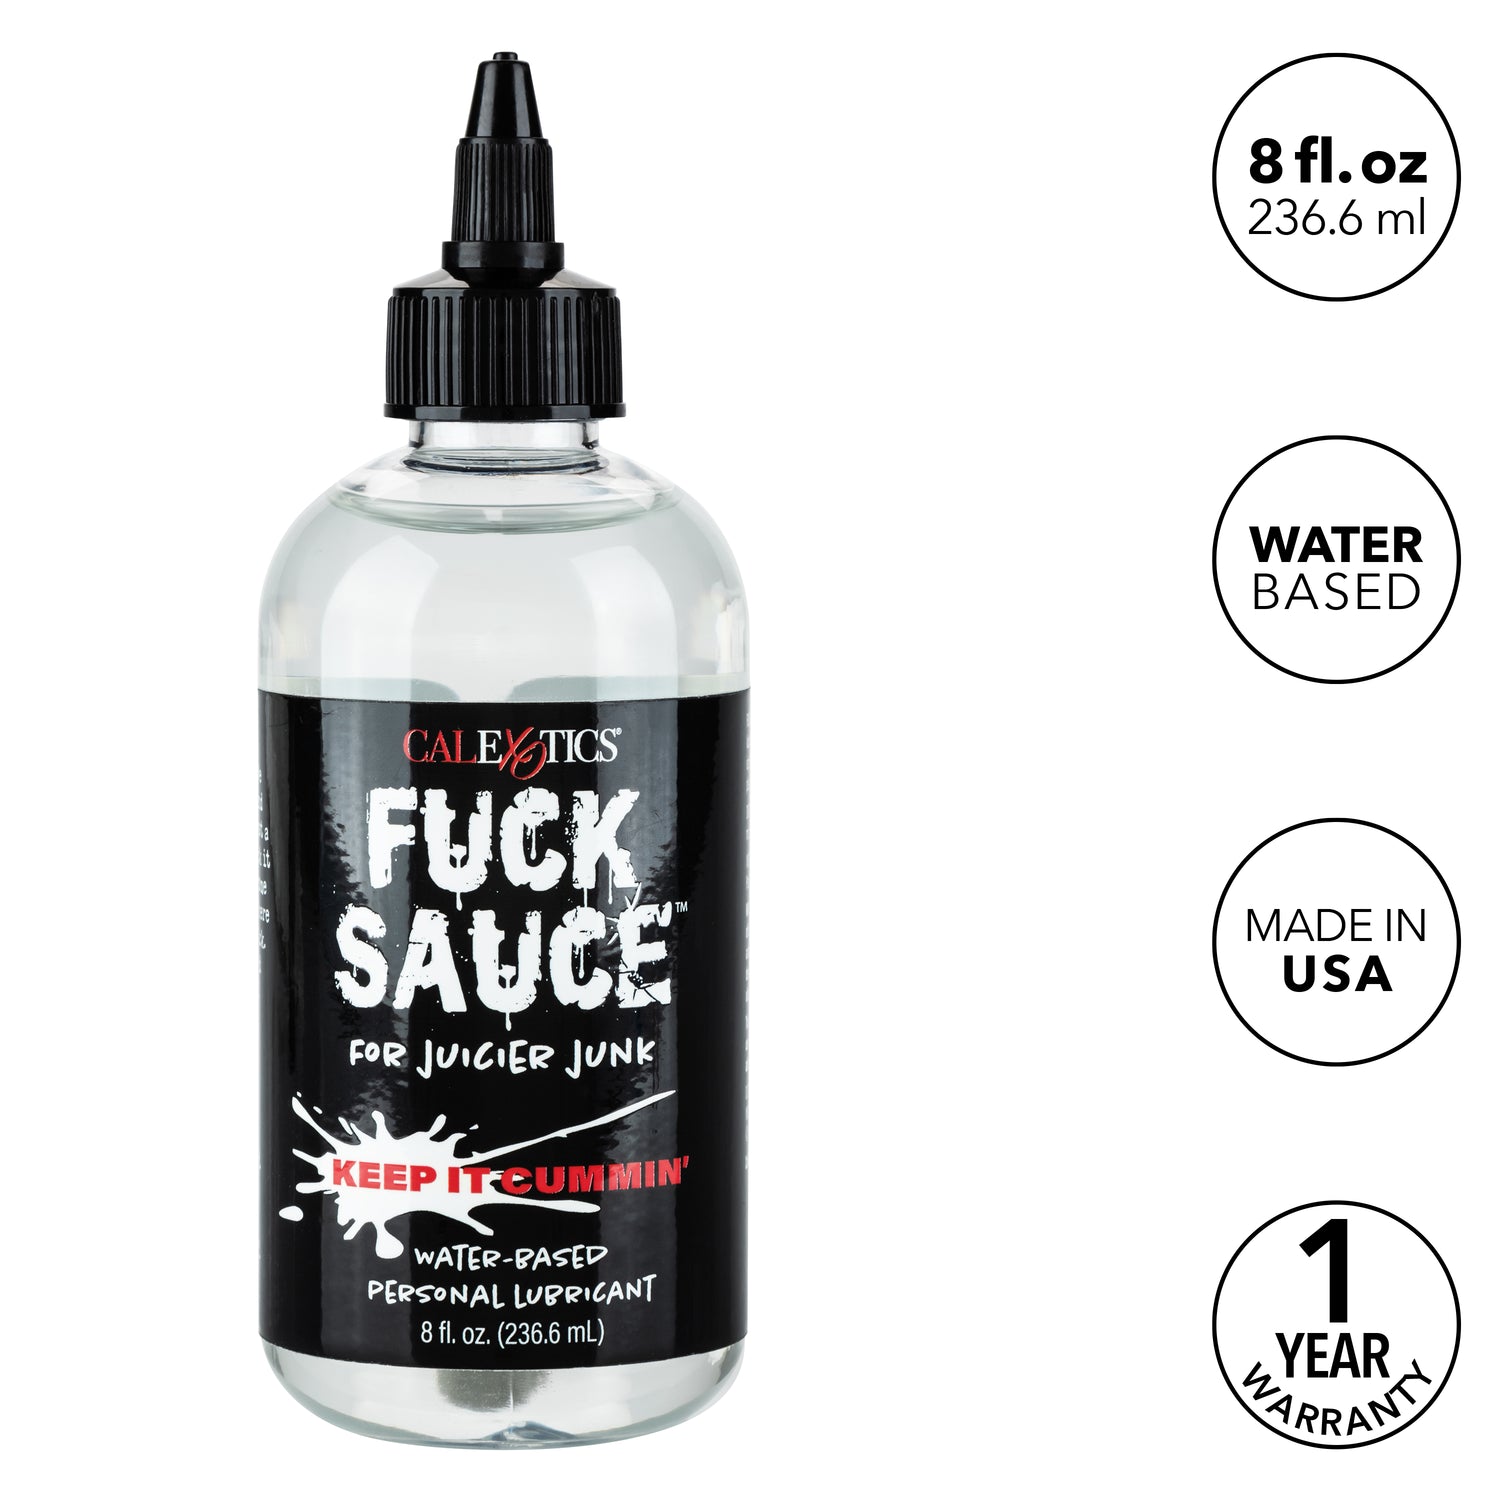 F* SAUCE Water-Based Personal Lubricant 8 fl. oz.